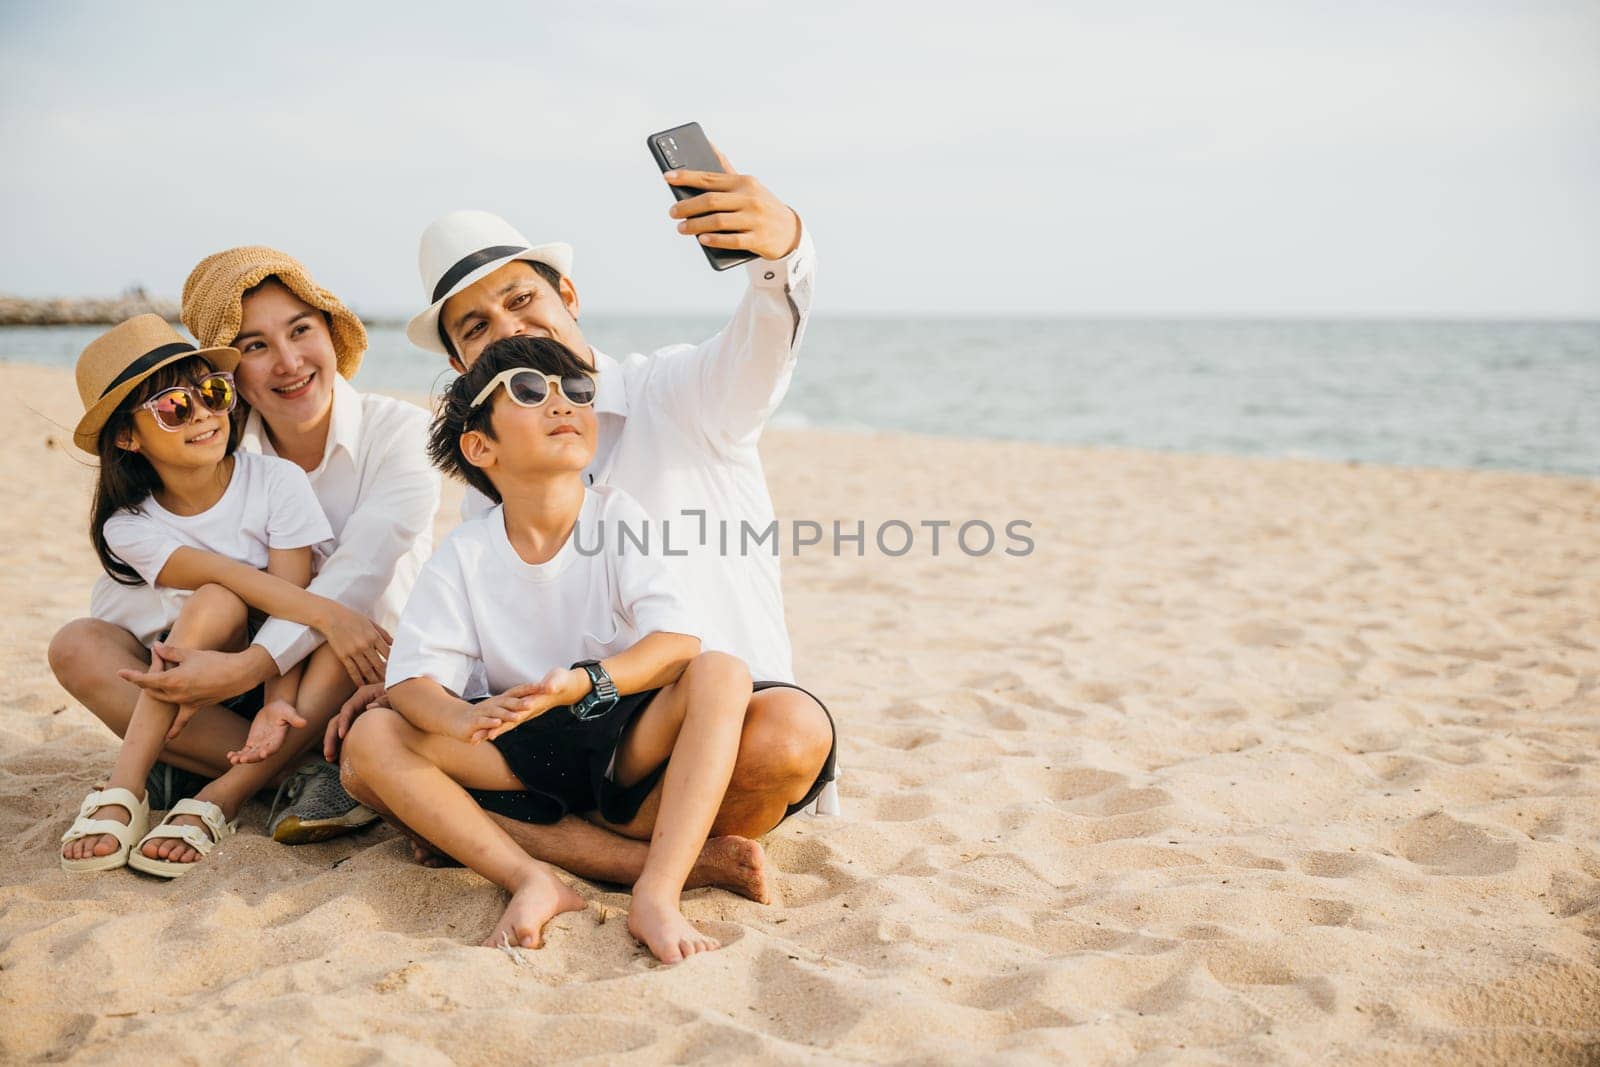 Summer joy on display as a happy family takes a lively selfie on the beach near the sea. Laughter smiles and the warmth of togetherness make this portrait a perfect capture of family happiness.